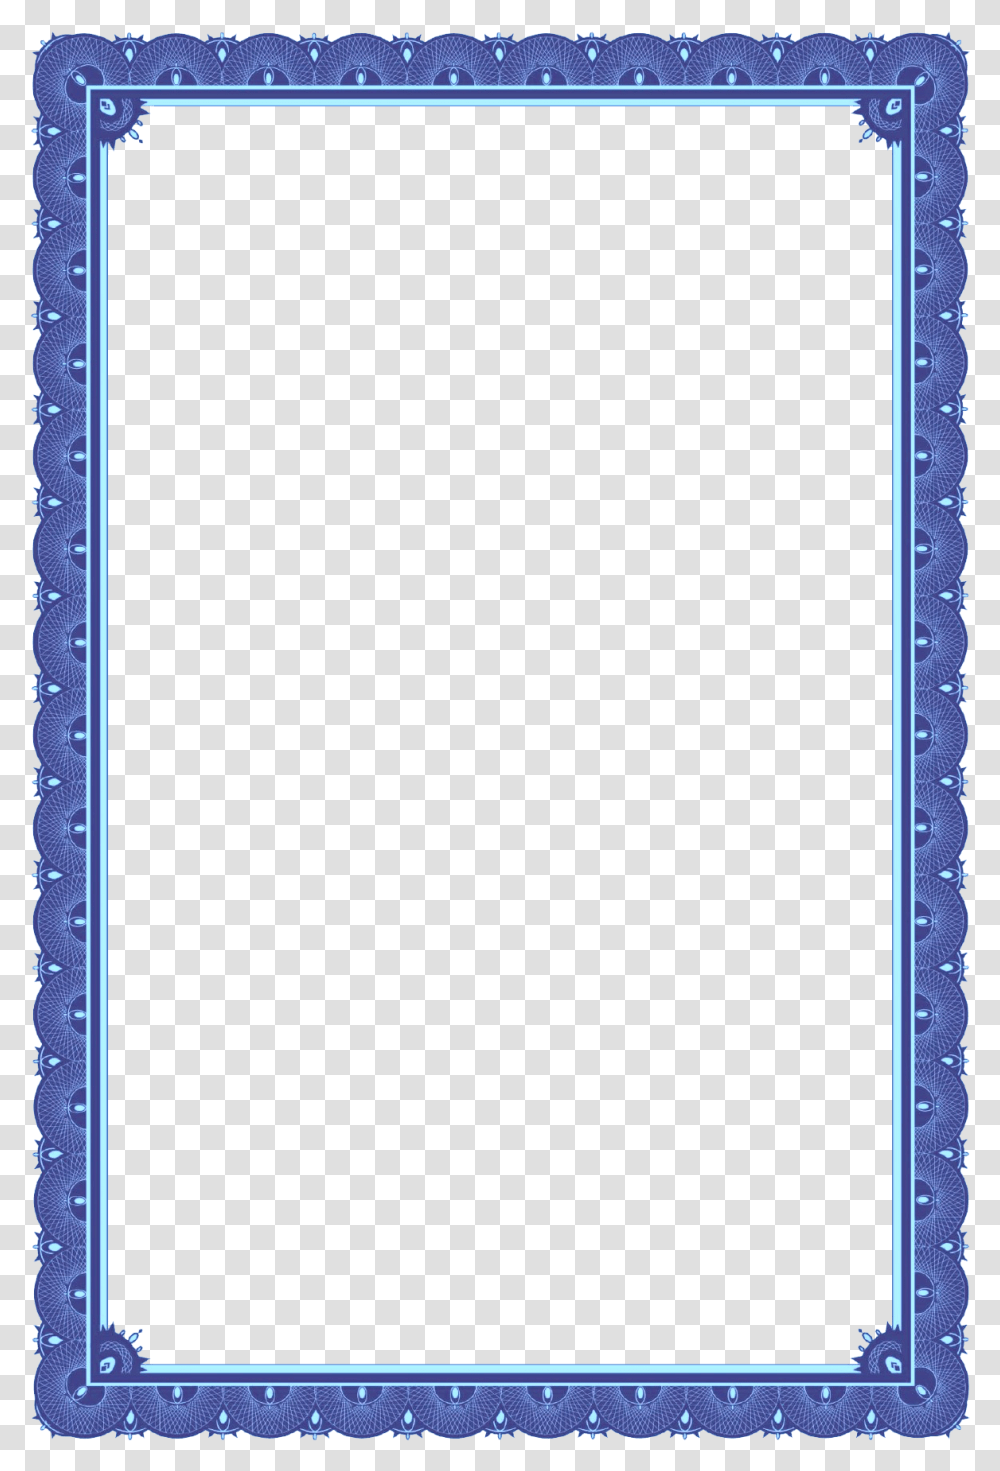 Certificate Borders, Screen, Electronics, Monitor, Display Transparent Png